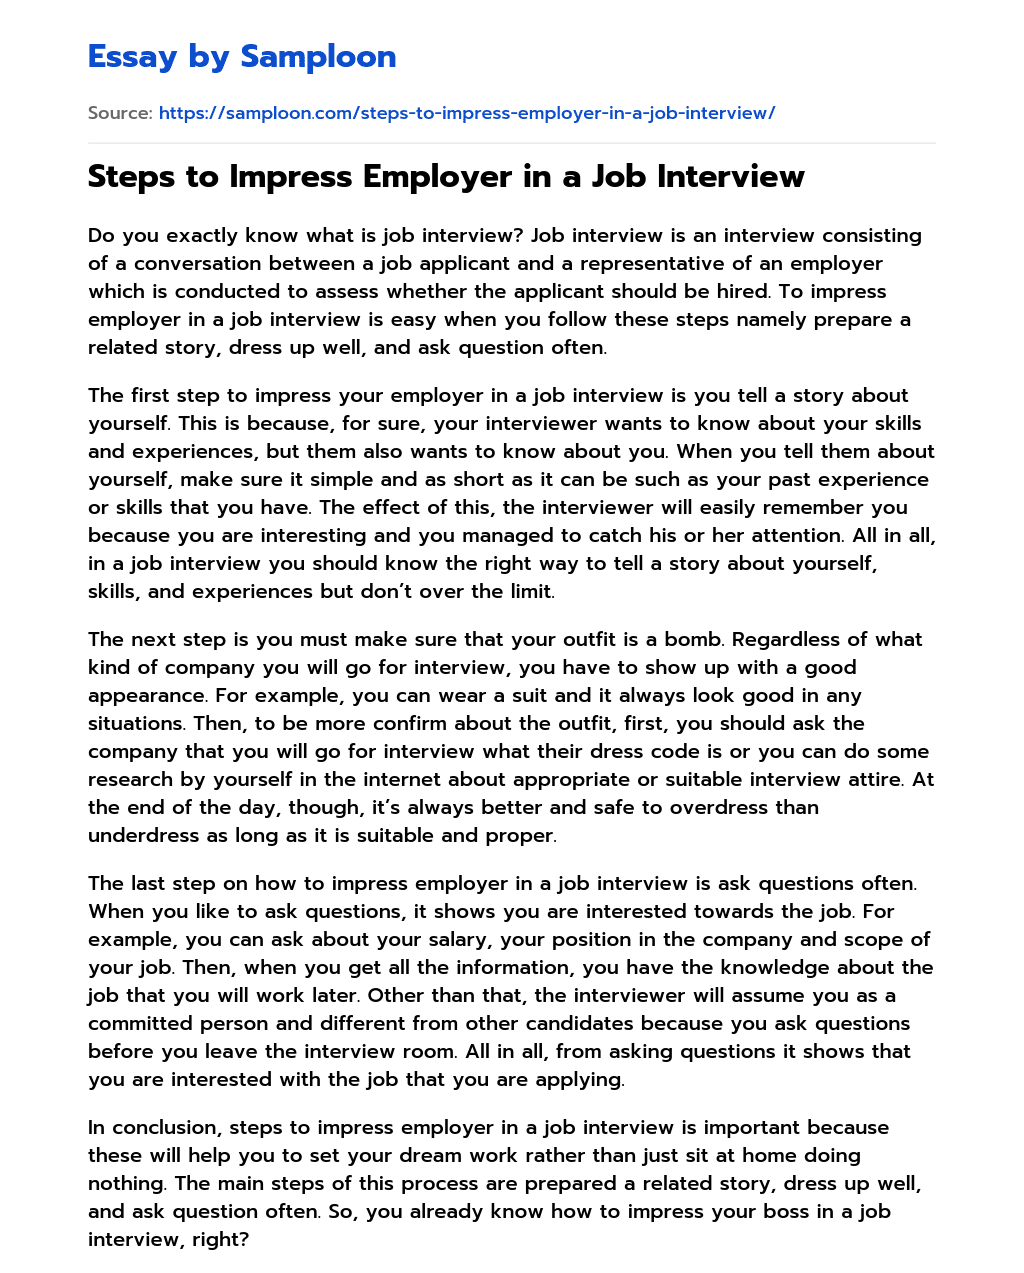 Steps to Impress Employer in a Job Interview essay